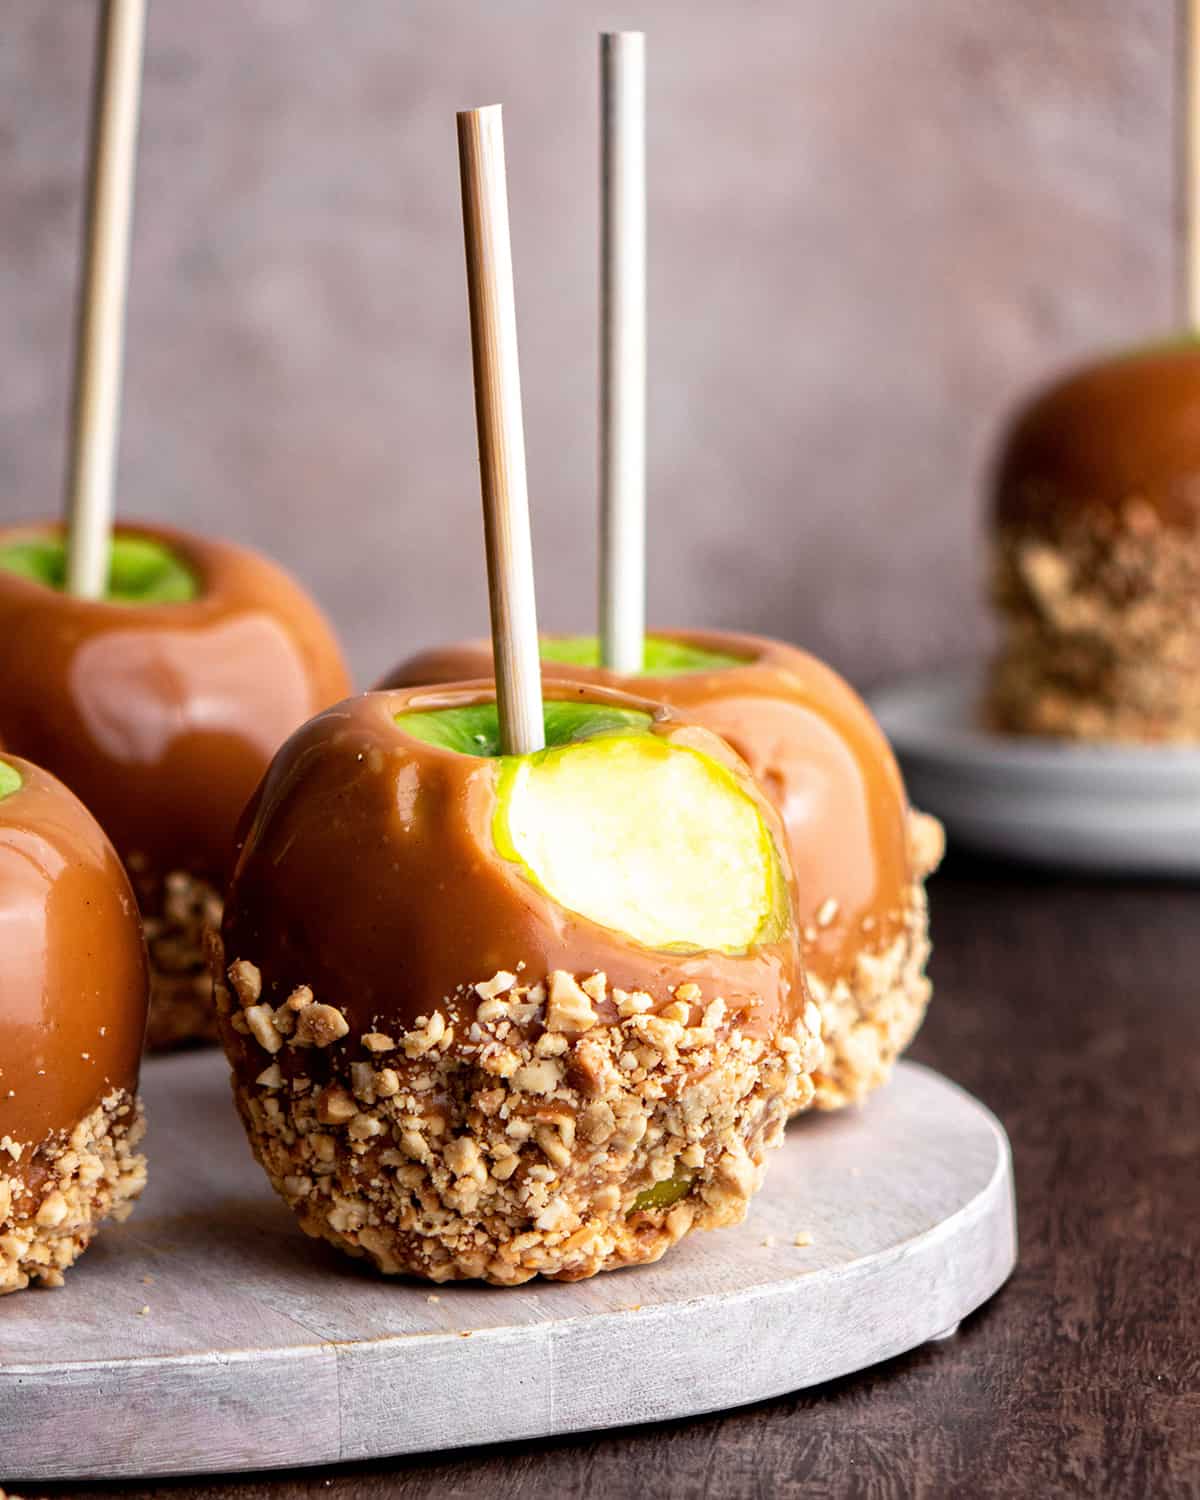 front view of 4 Homemade Caramel Apples, one has a bite taken out of it 